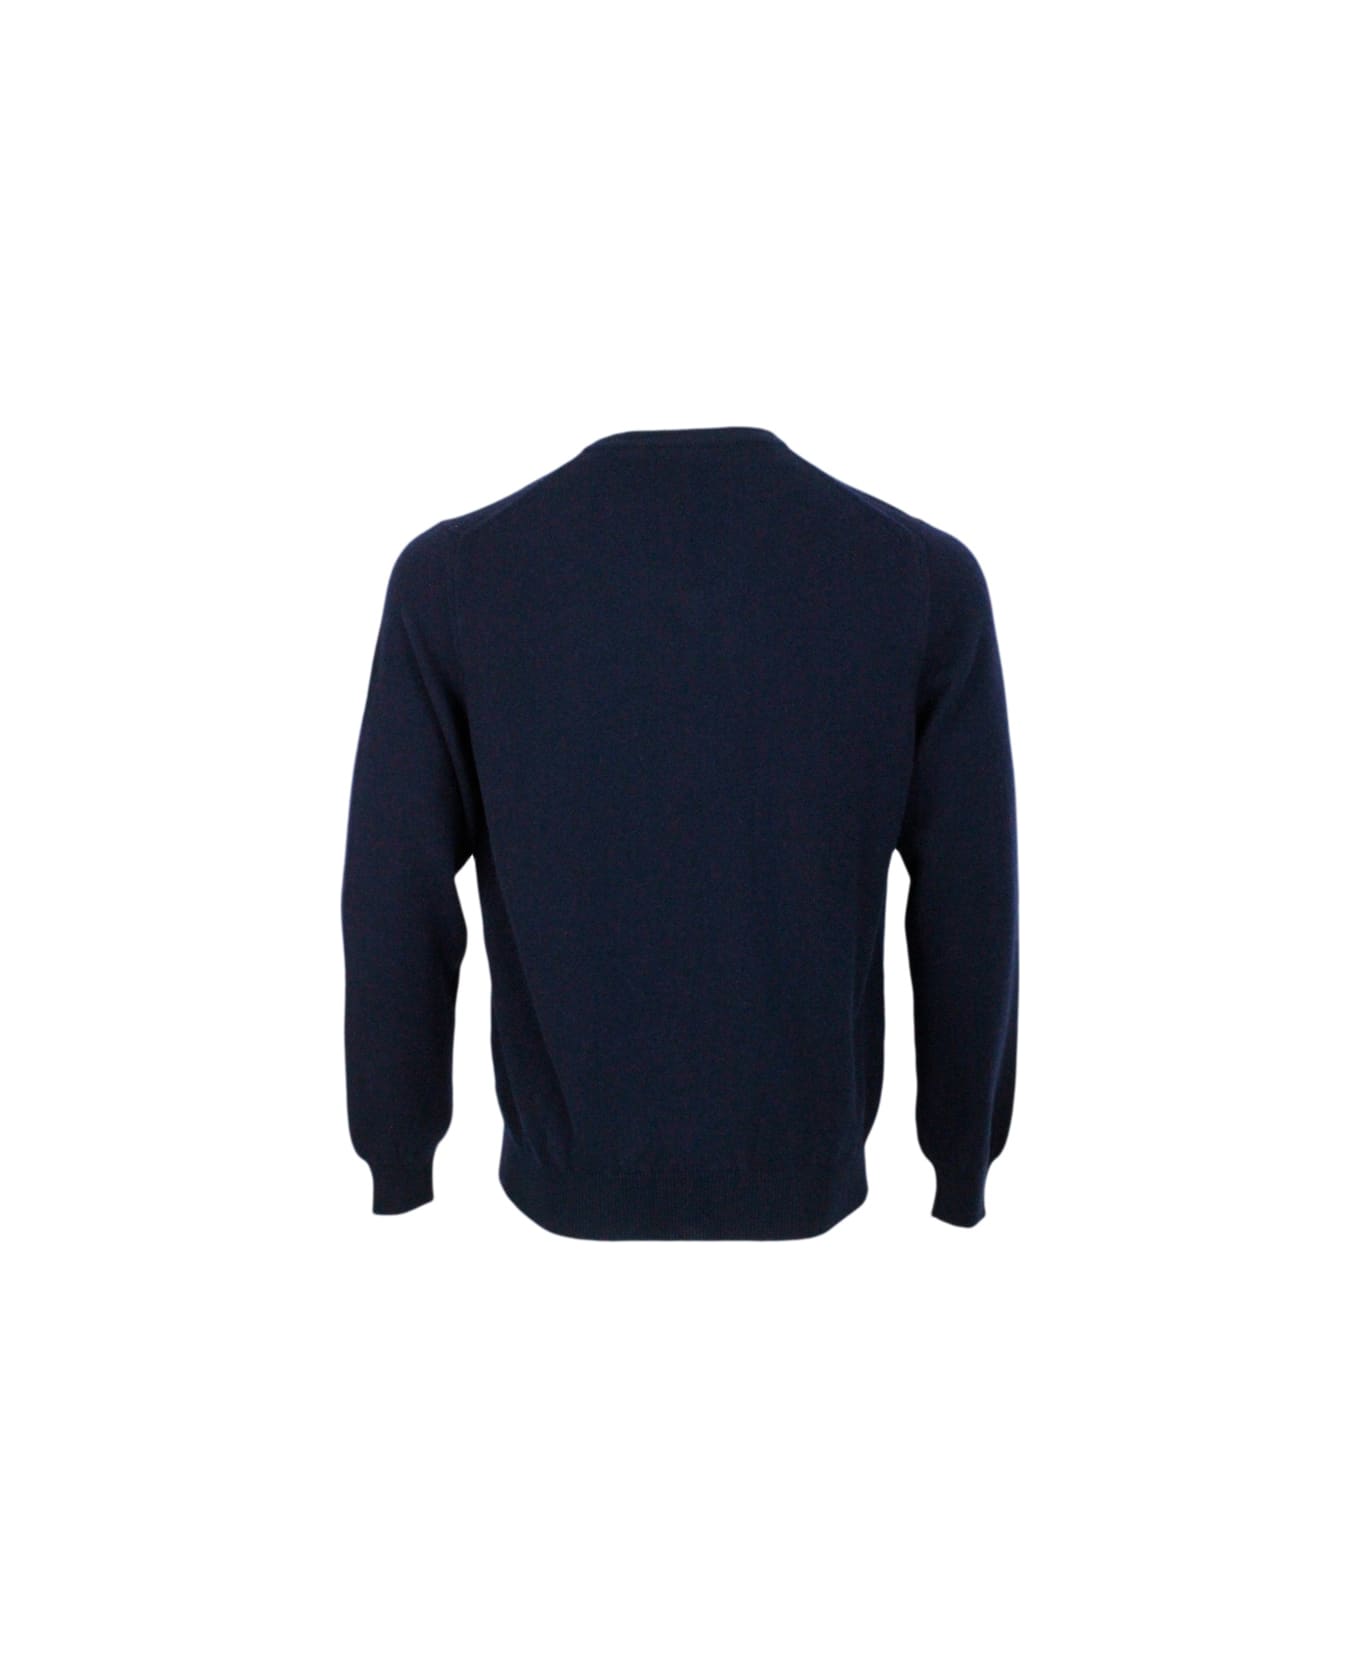 Colombo Long-sleeved V-neck Sweater In Fine 2-ply 100% Kid Cashmere With Special Processing On The Edge Of The Neck - Blu navy ニットウェア